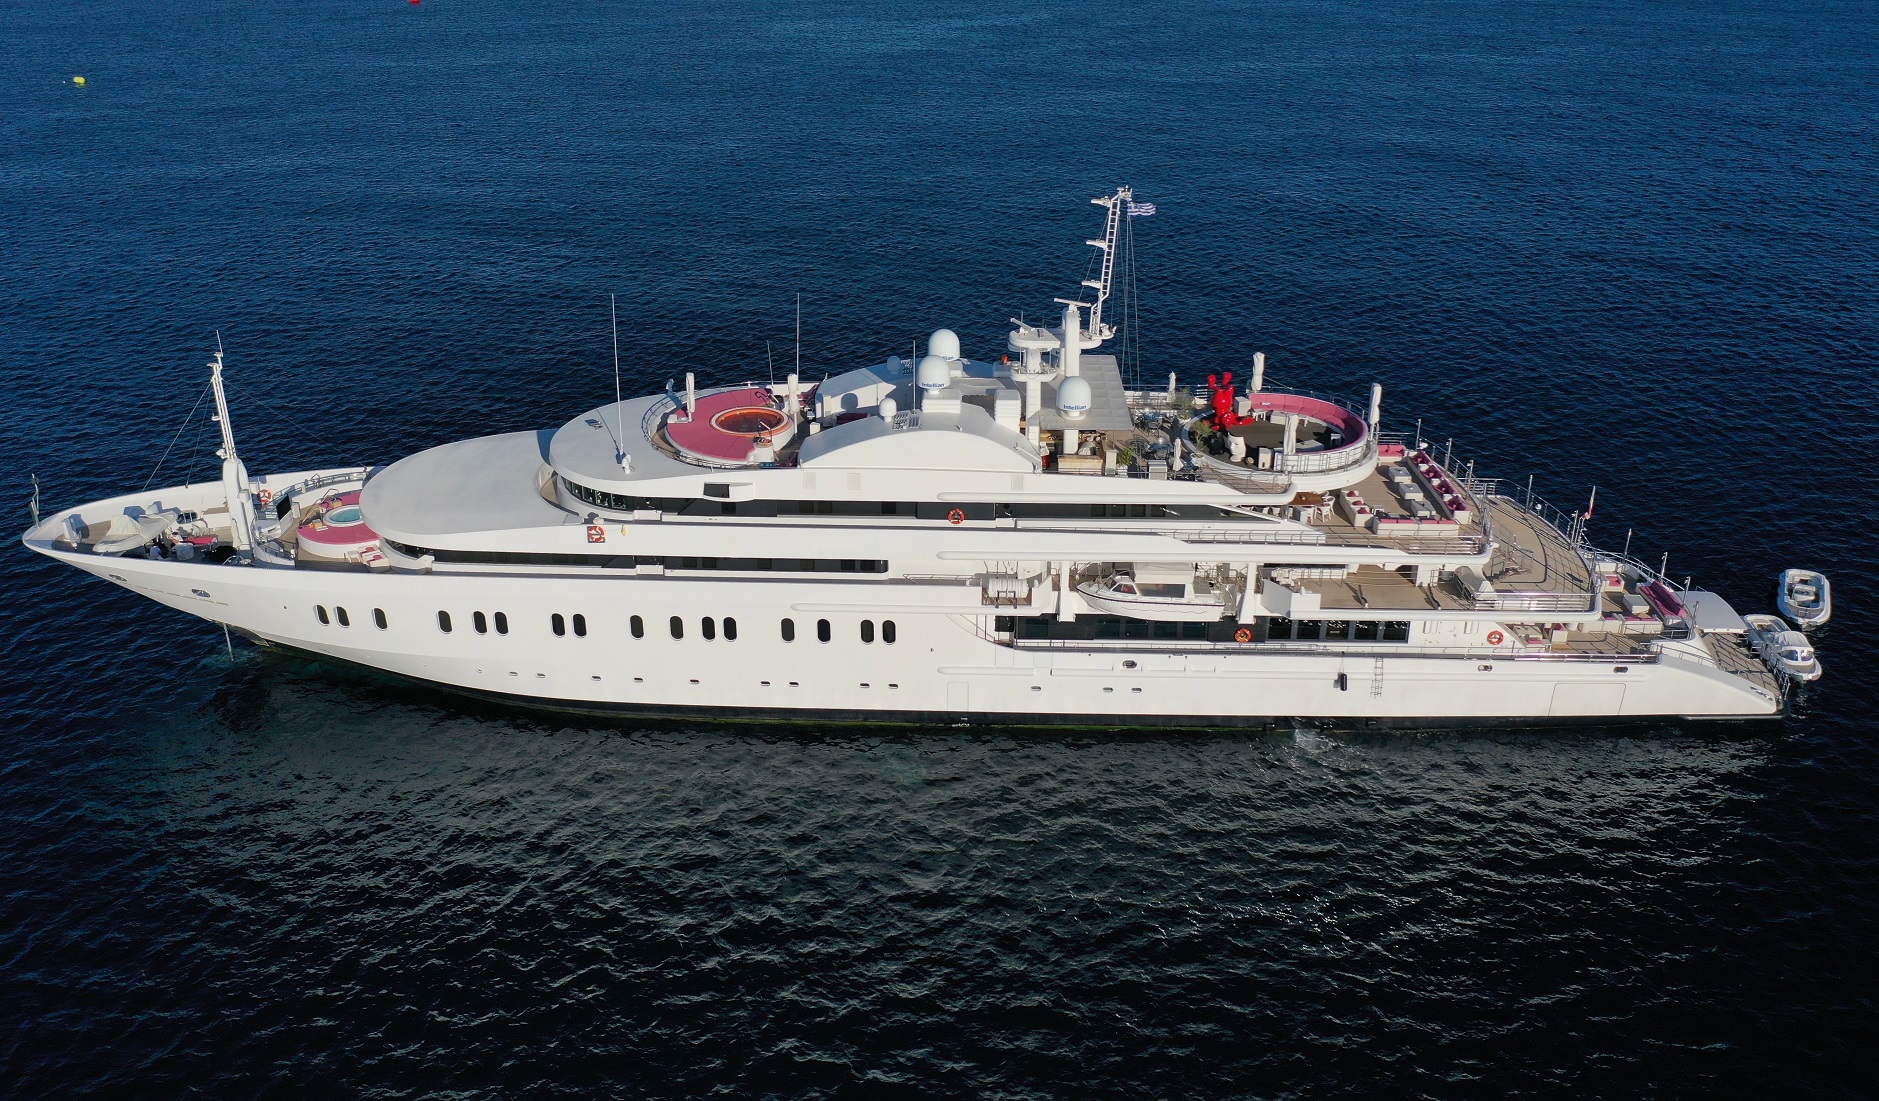 <p>A beast at 91.4 m, <em>Moonlight II </em>is essentially a cruise ship, capable of hosting 36 guests across 18 rooms. And guess who's already been one of those guests? MMA fighter Conor McGregor. Pretty cool.</p>